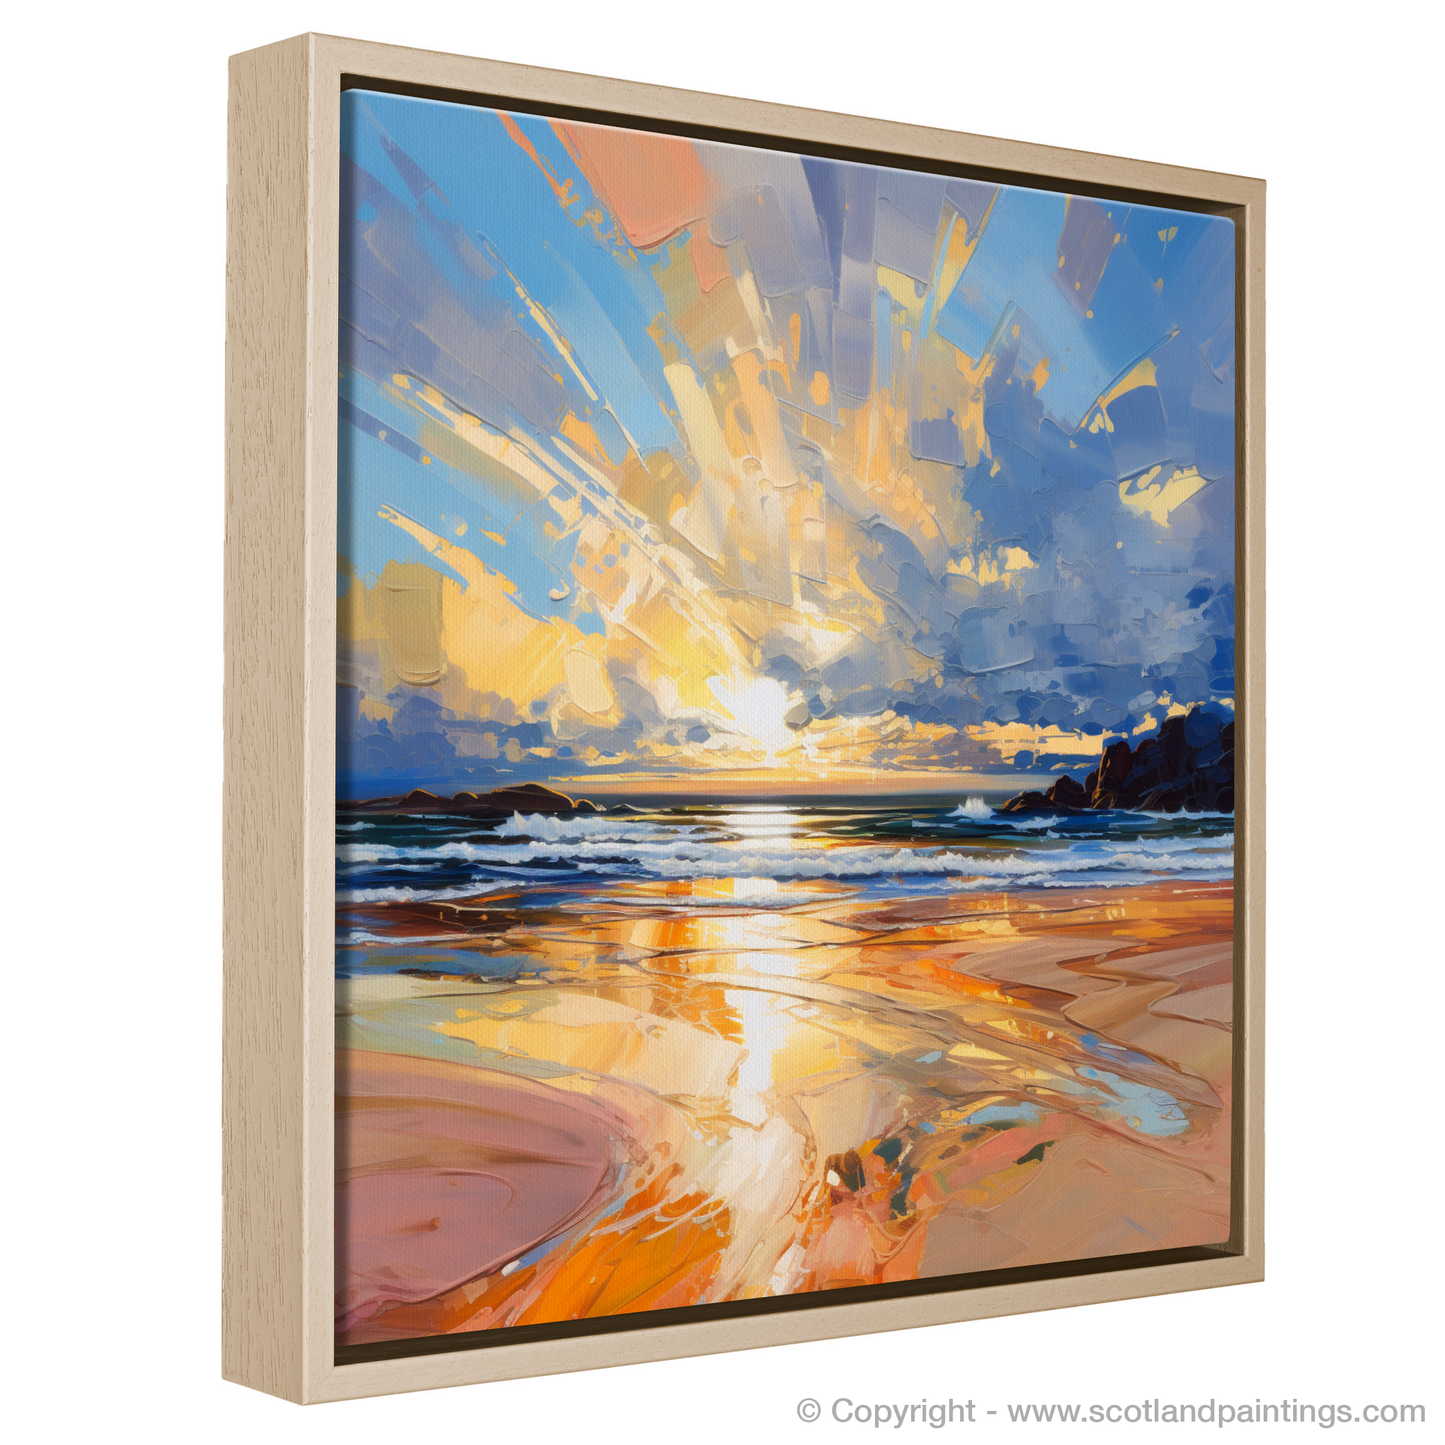 Painting and Art Print of Balmedie Beach at golden hour entitled "Golden Embrace of Balmedie Beach".